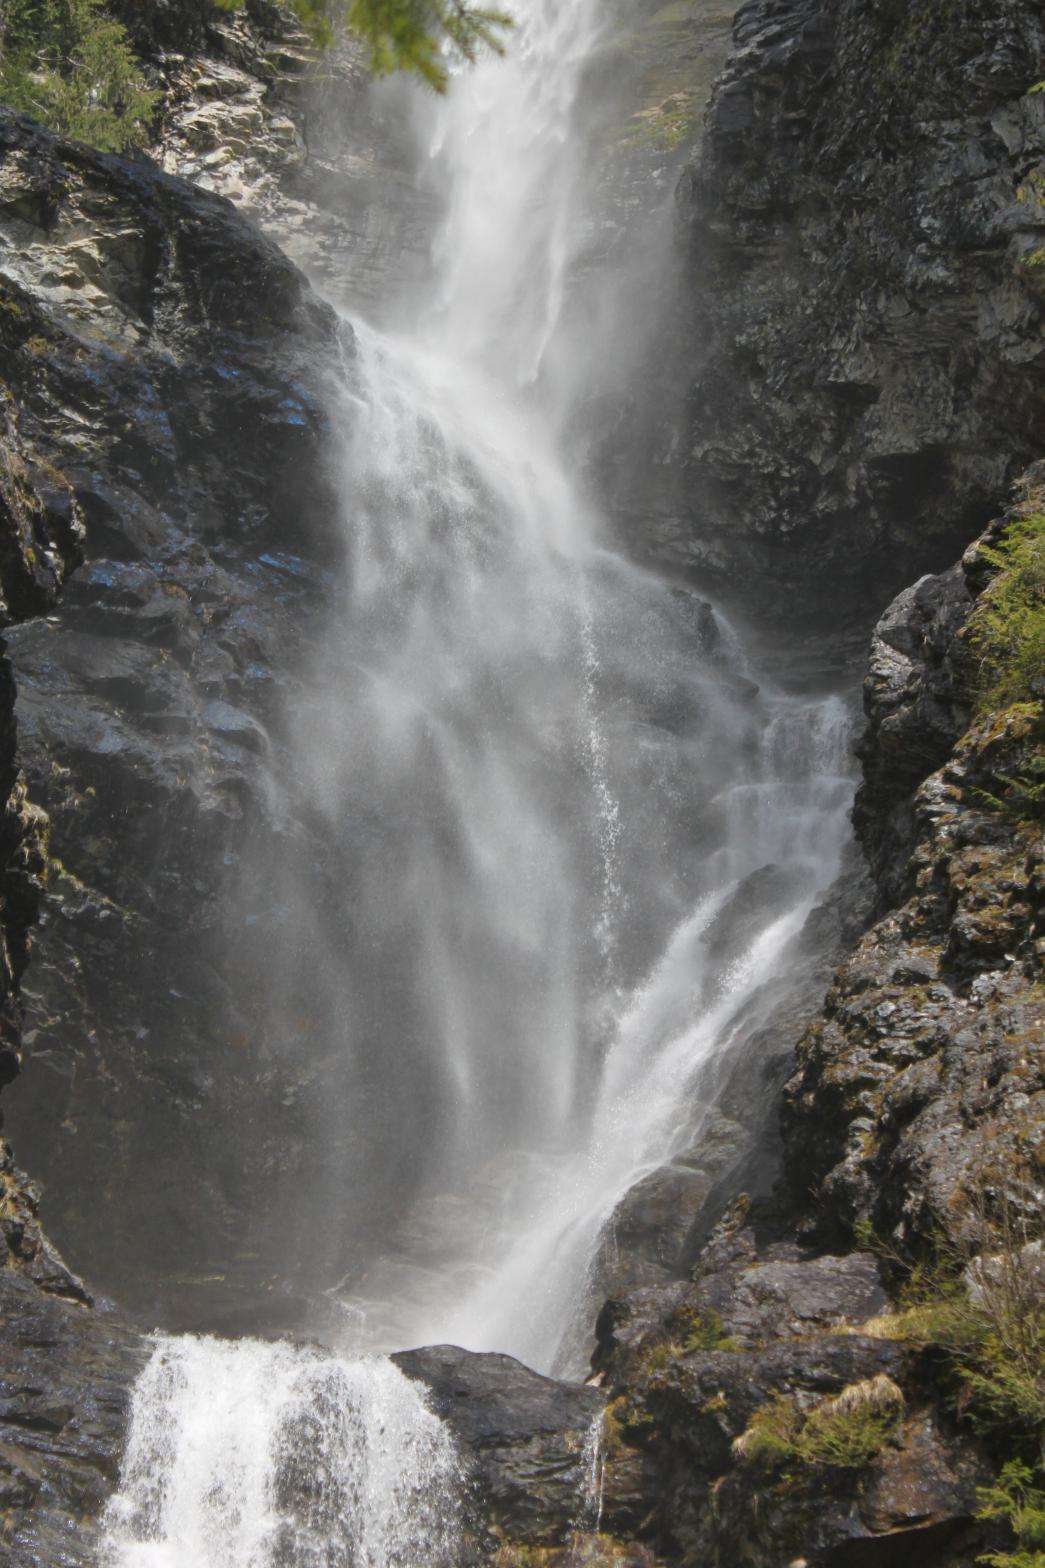 Middle section of the falls